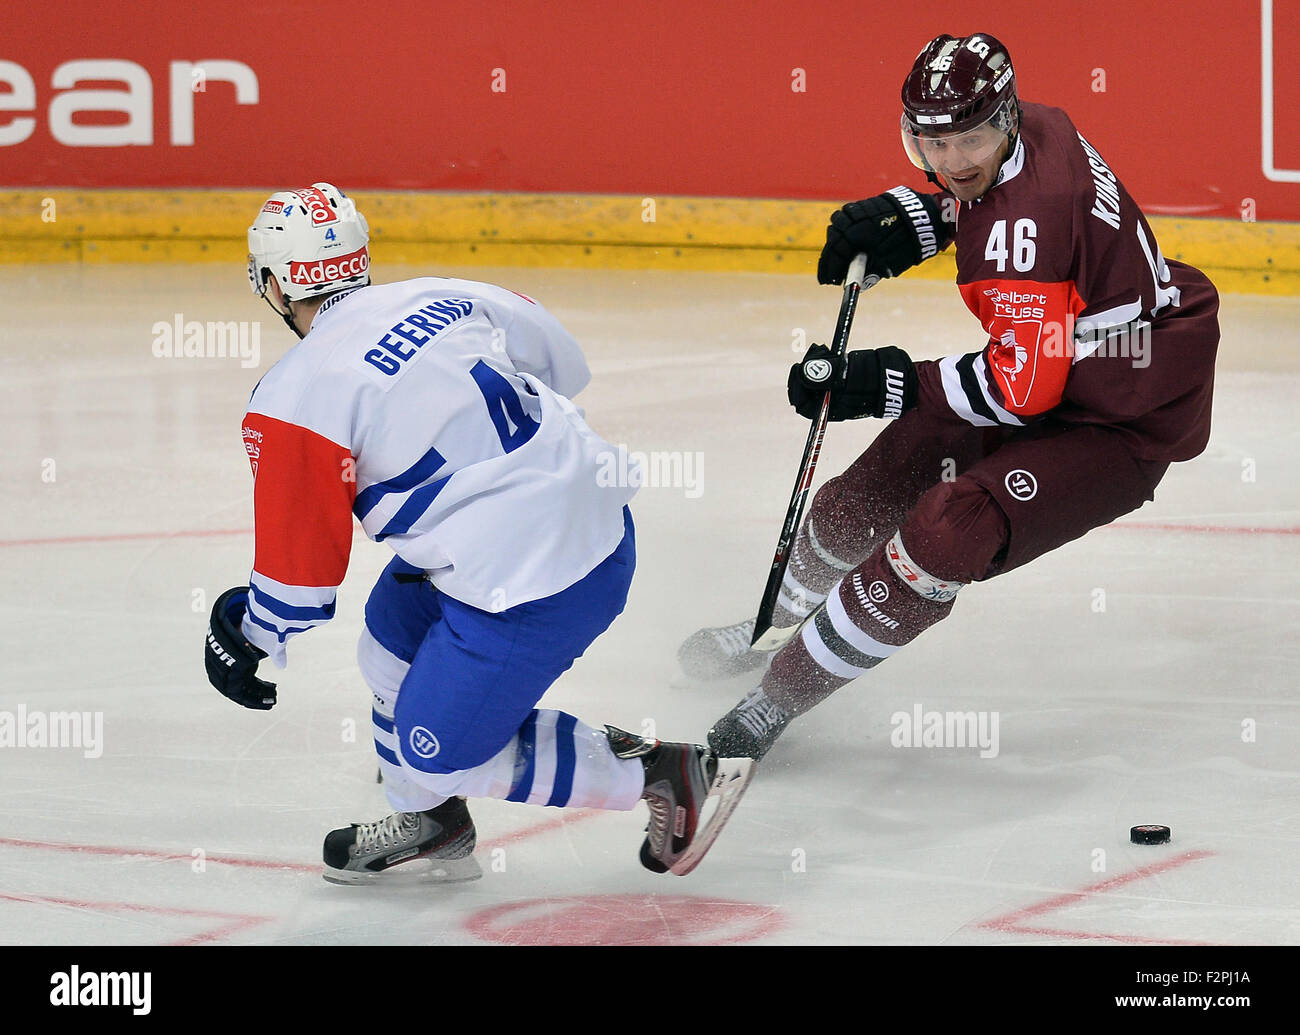 Prague, Czech Republic. 22nd Sep, 2015. From left: Patrick Geering of Zurich and Petr Kumstat of Sparta during the ice hockey Champions League, 1st round play off match HC Sparta Praha vs ZSC Zurich Lions in Prague, Czech Republic, September 22, 2015. © Katerina Sulova/CTK Photo/Alamy Live News Stock Photo